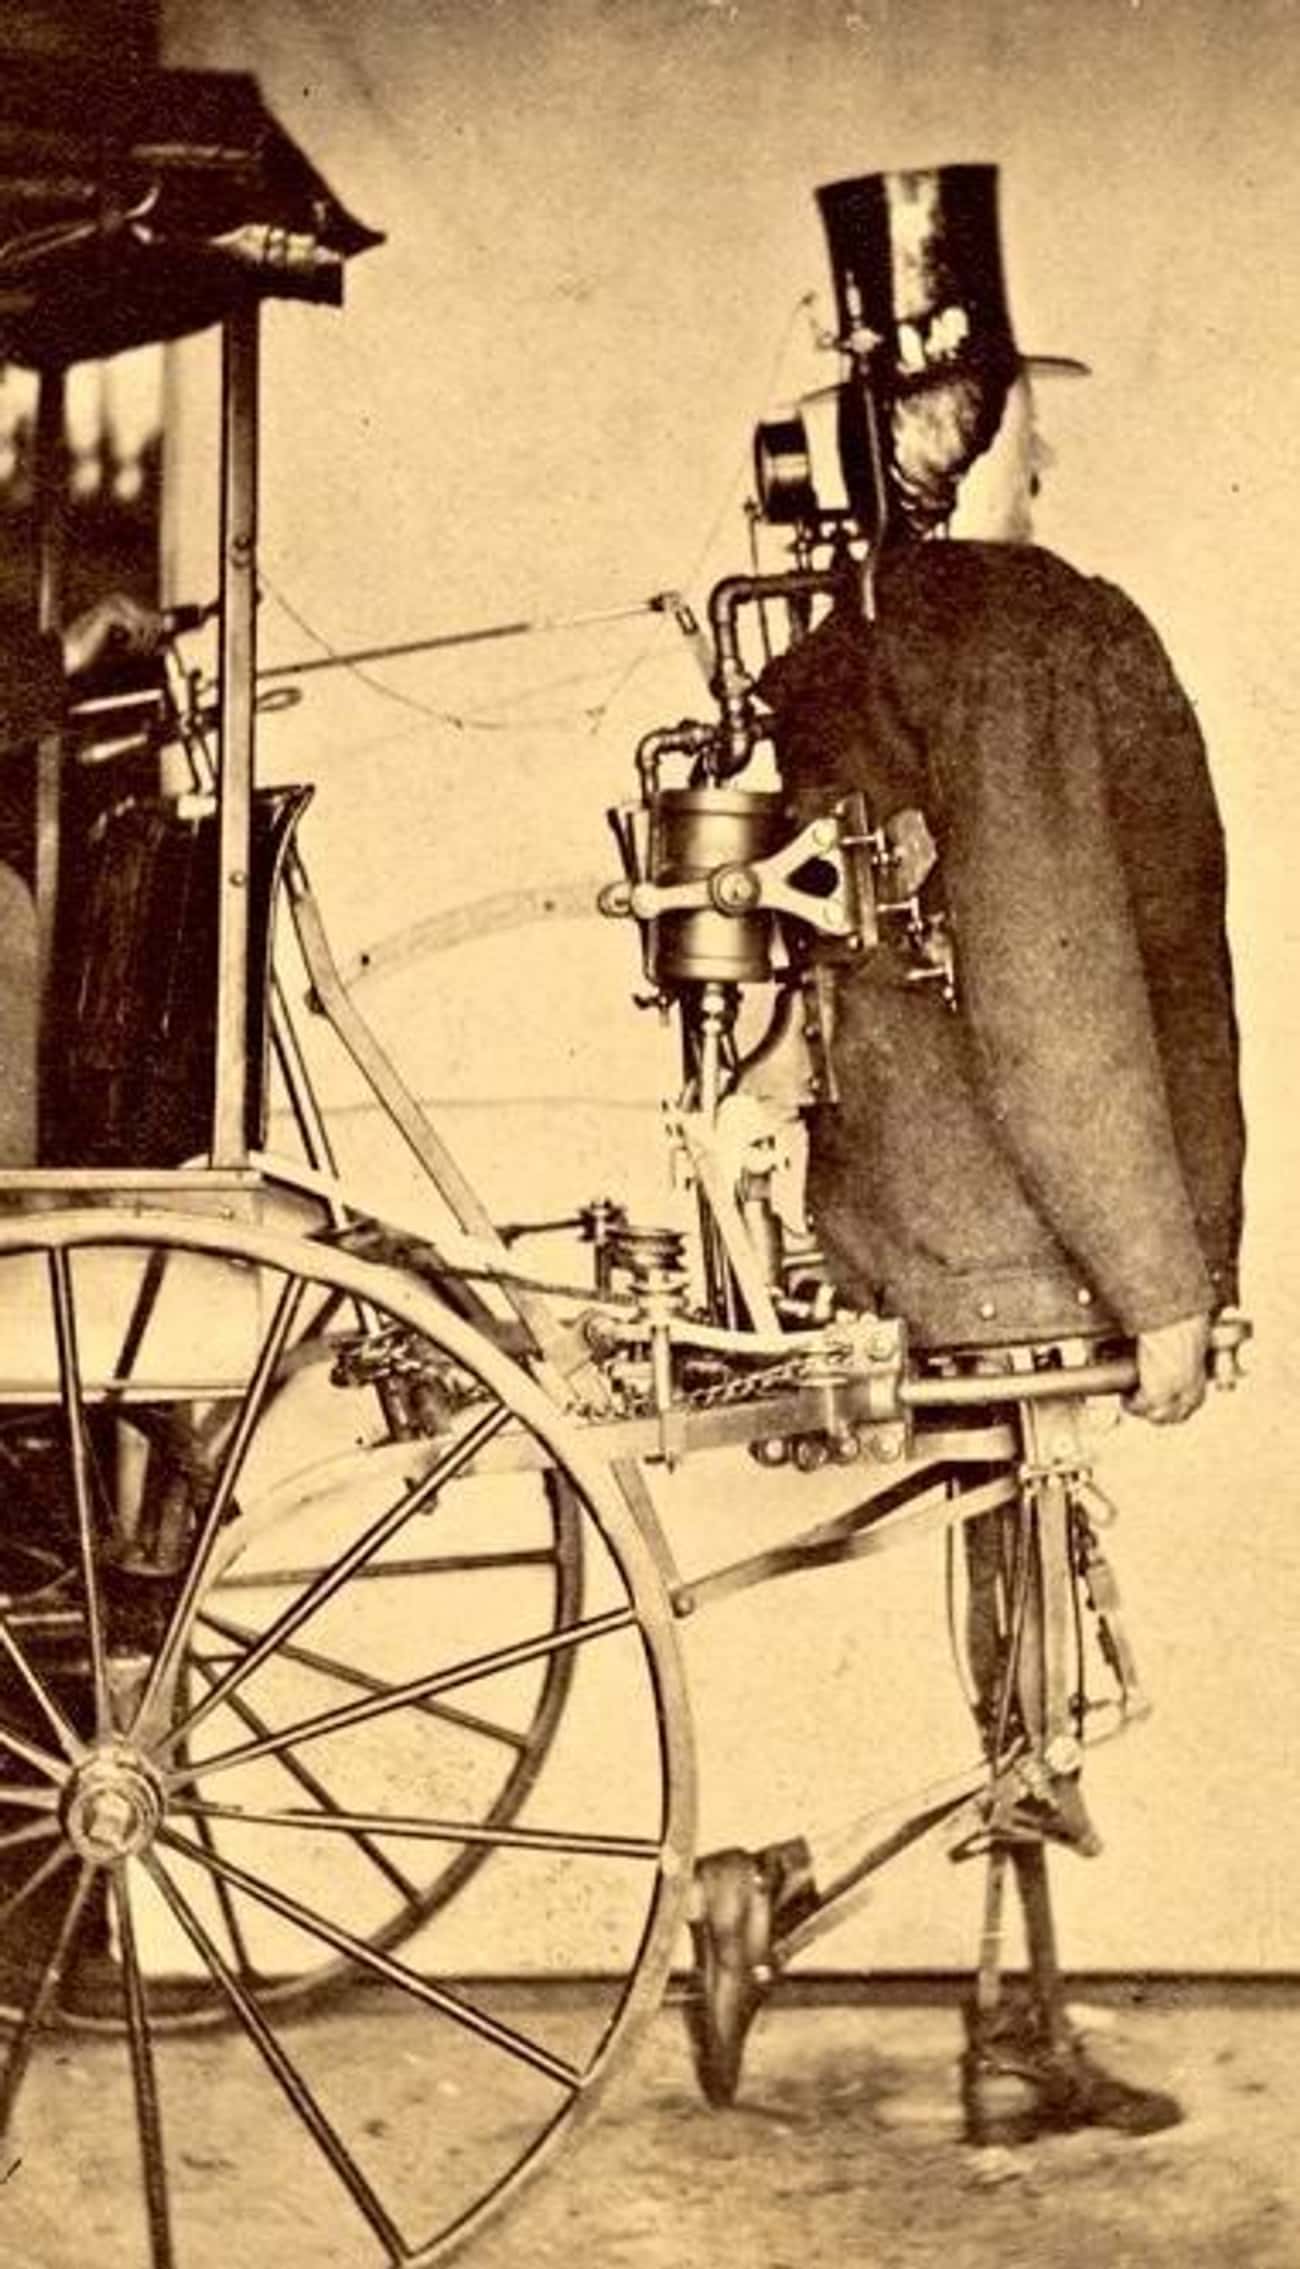 Steam Man, The First American Robot; March 24, 1868